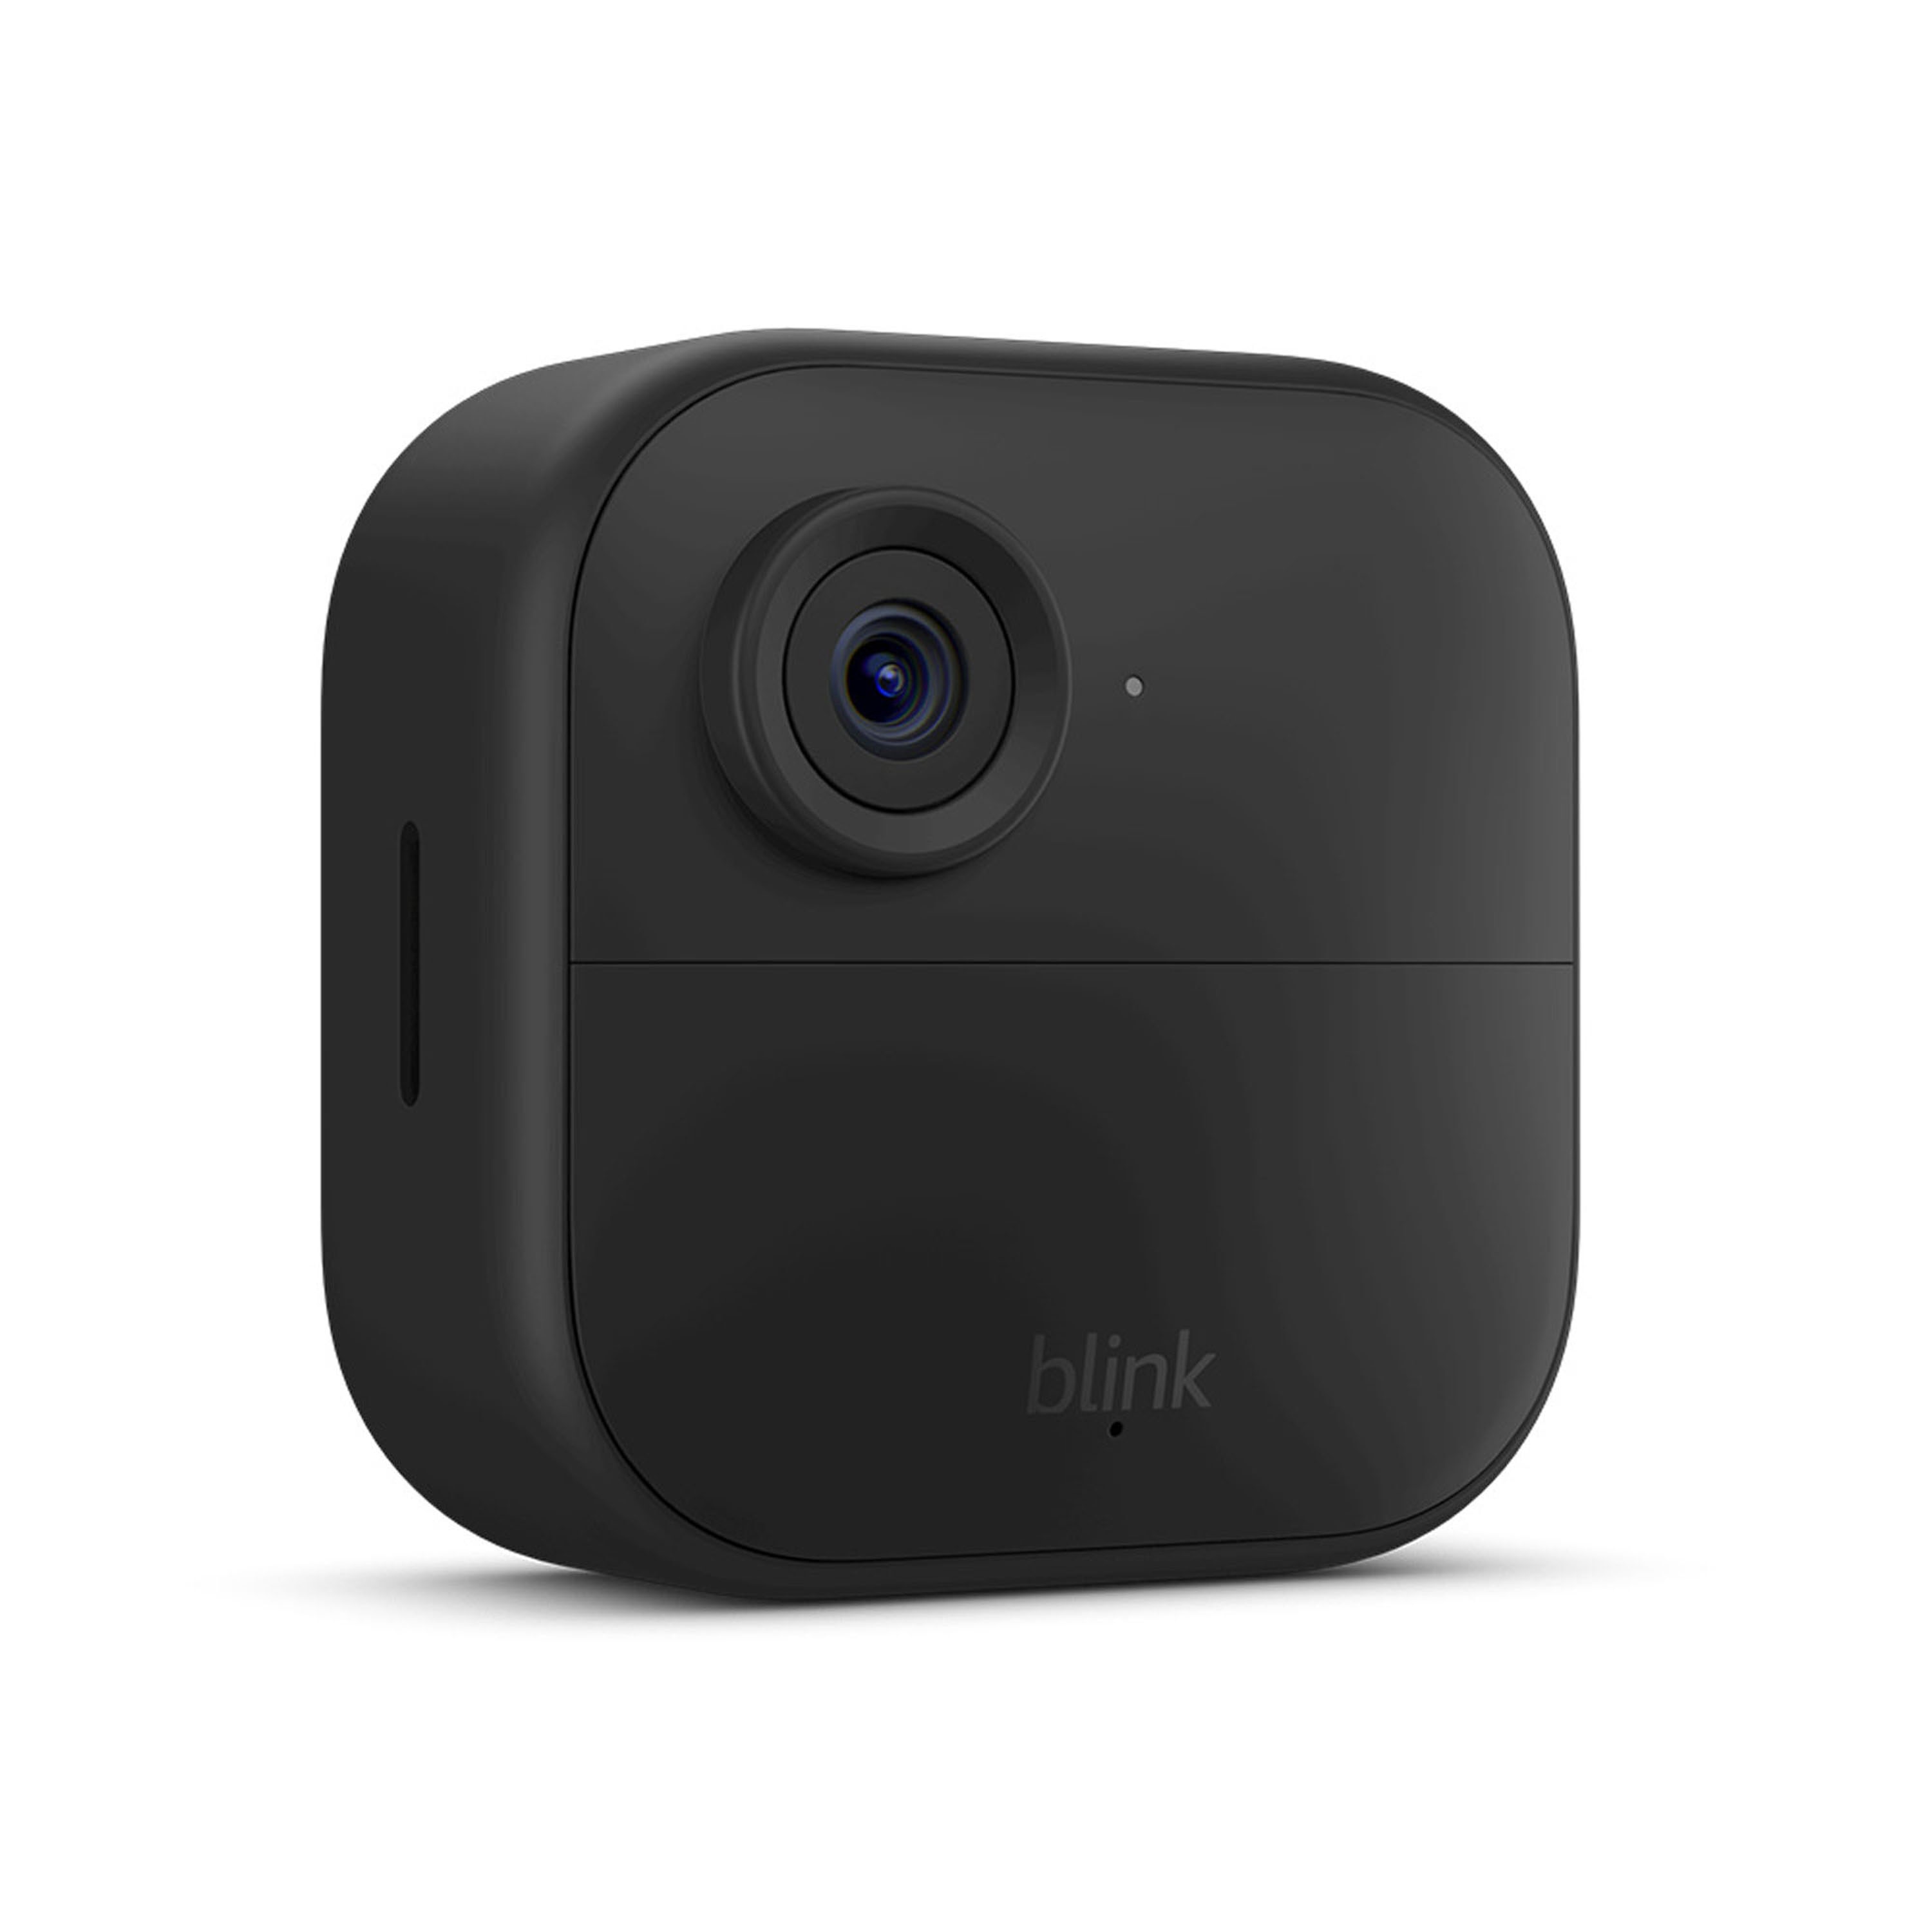 These Refurbished Blink Cameras Are up to 66% Off